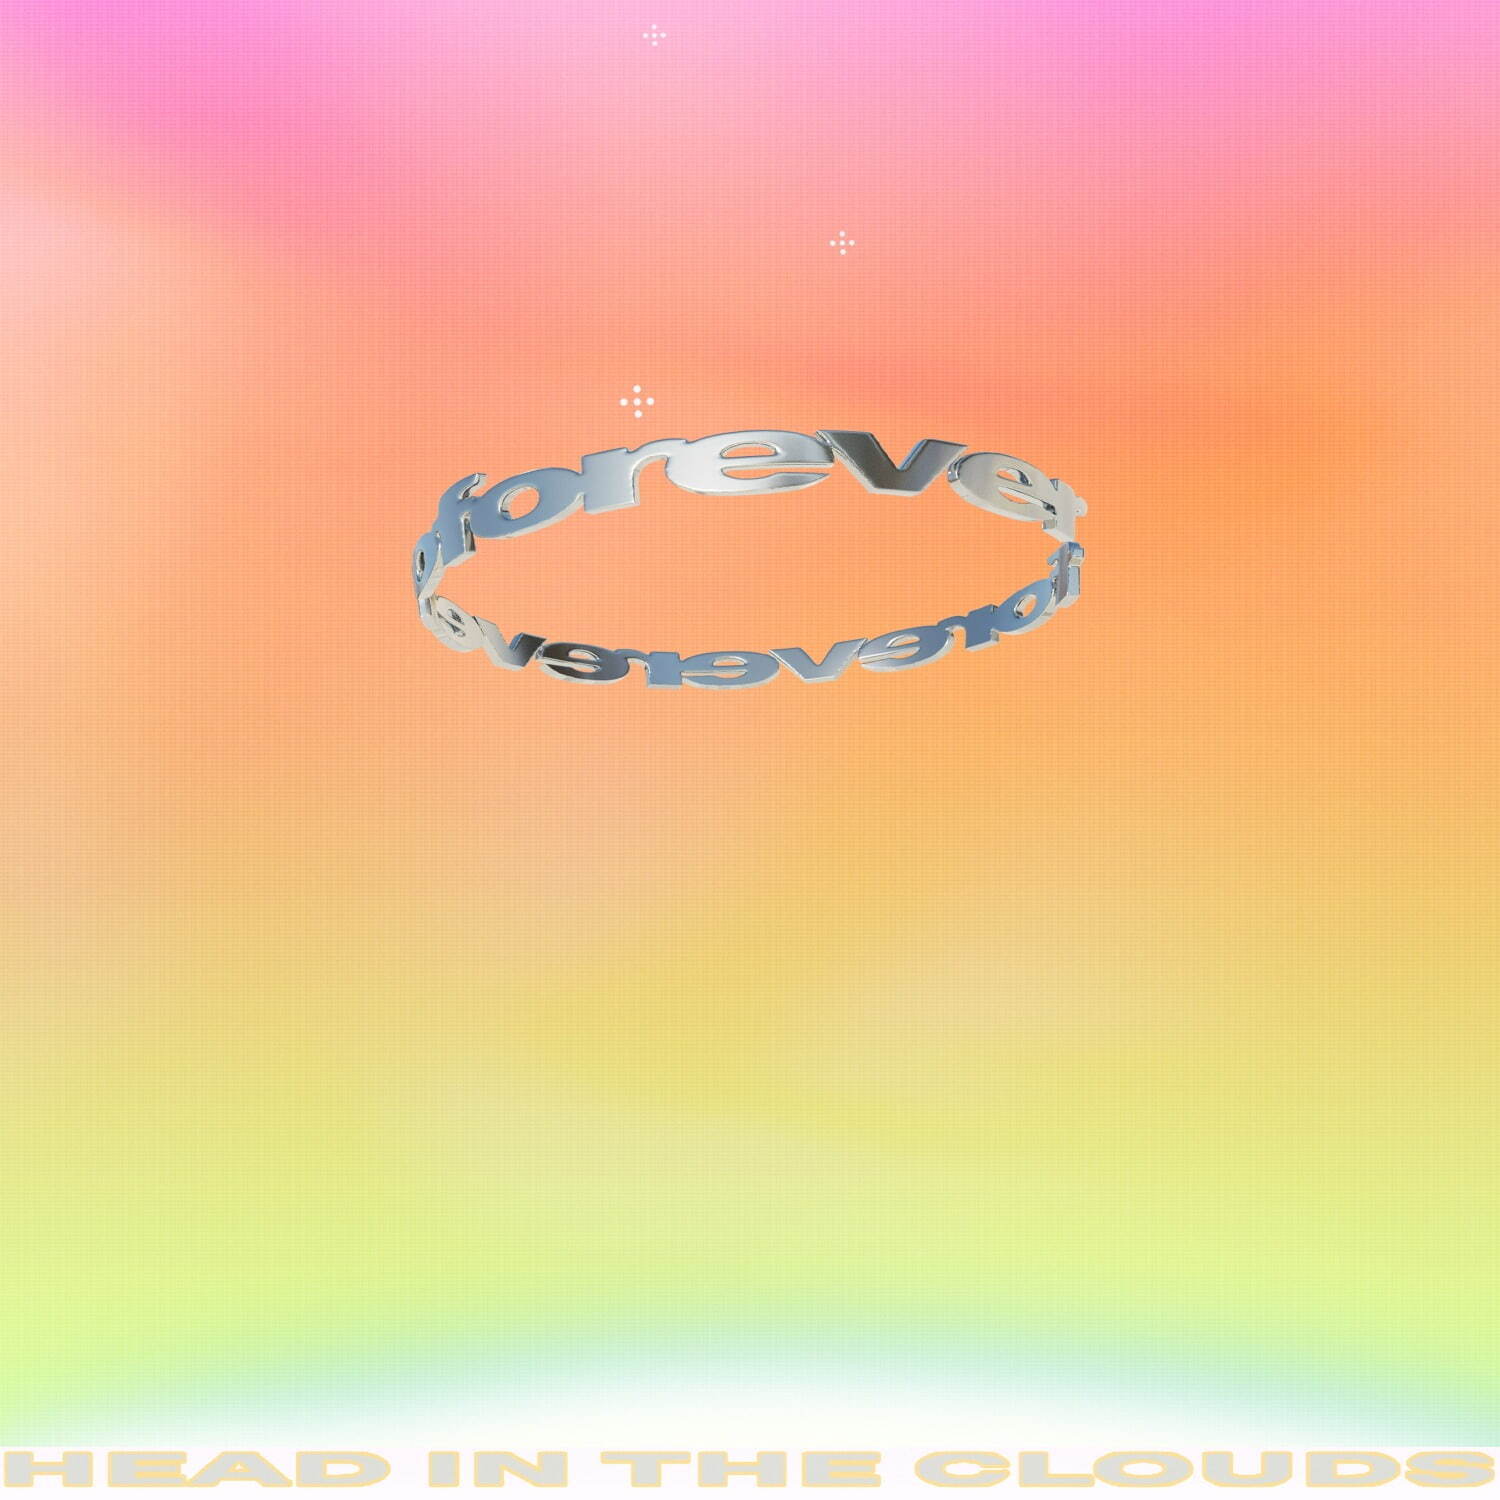 88rising 最新EP『Head In The Clouds Forever』